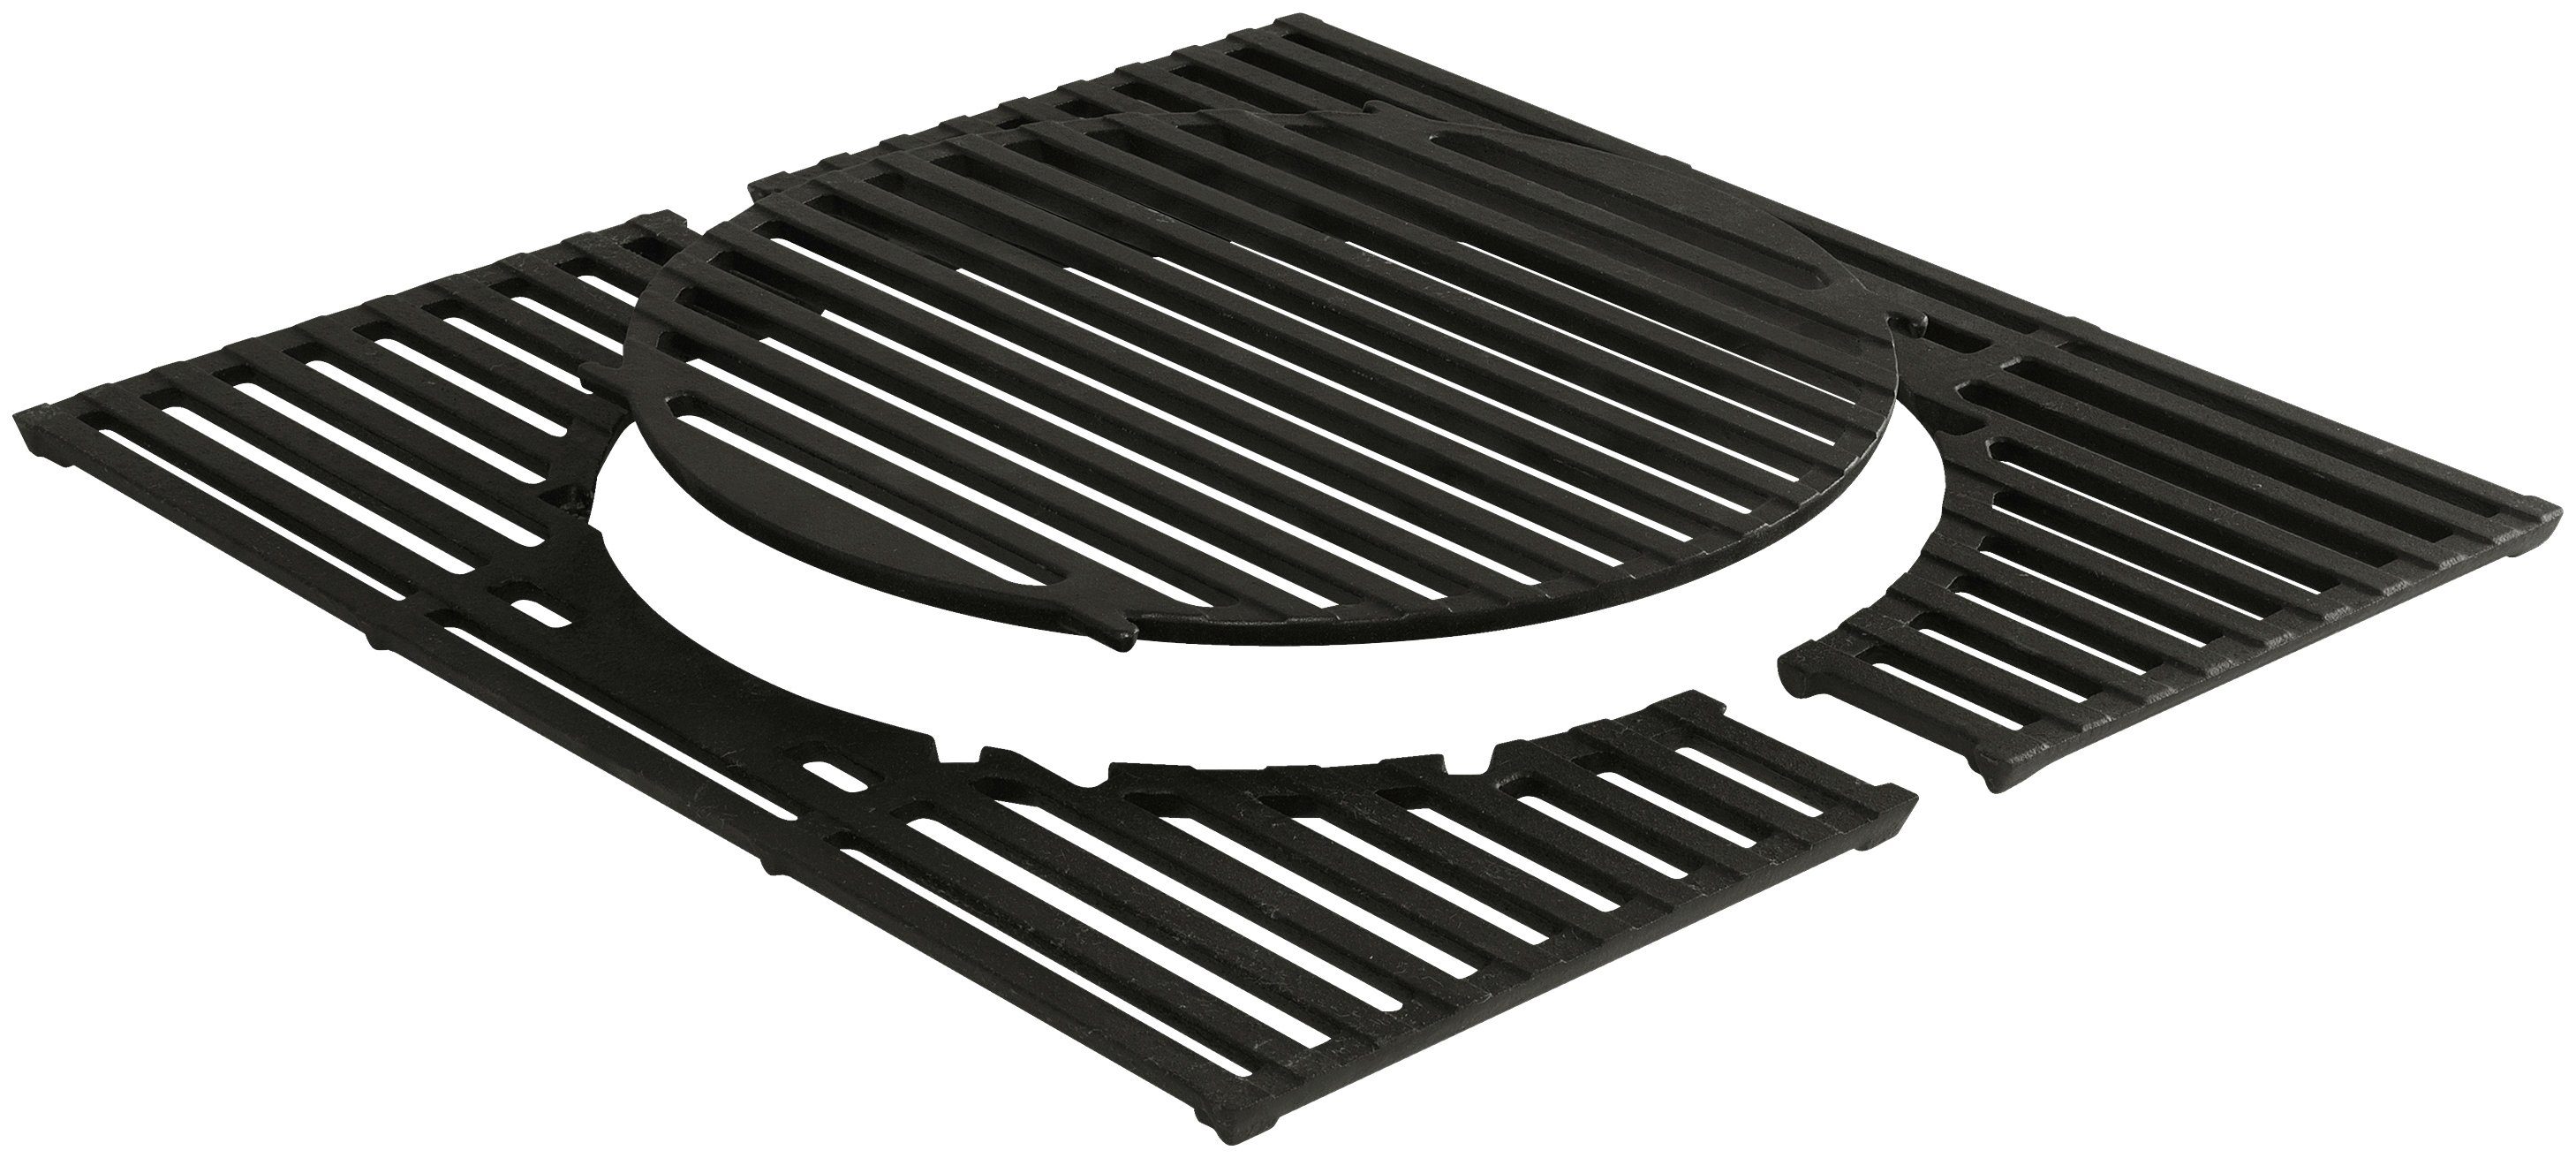 Enders® Grillrost »SWITCH GRID« (1-St), Gussrost für Gasgrill Boston 2 Turbo